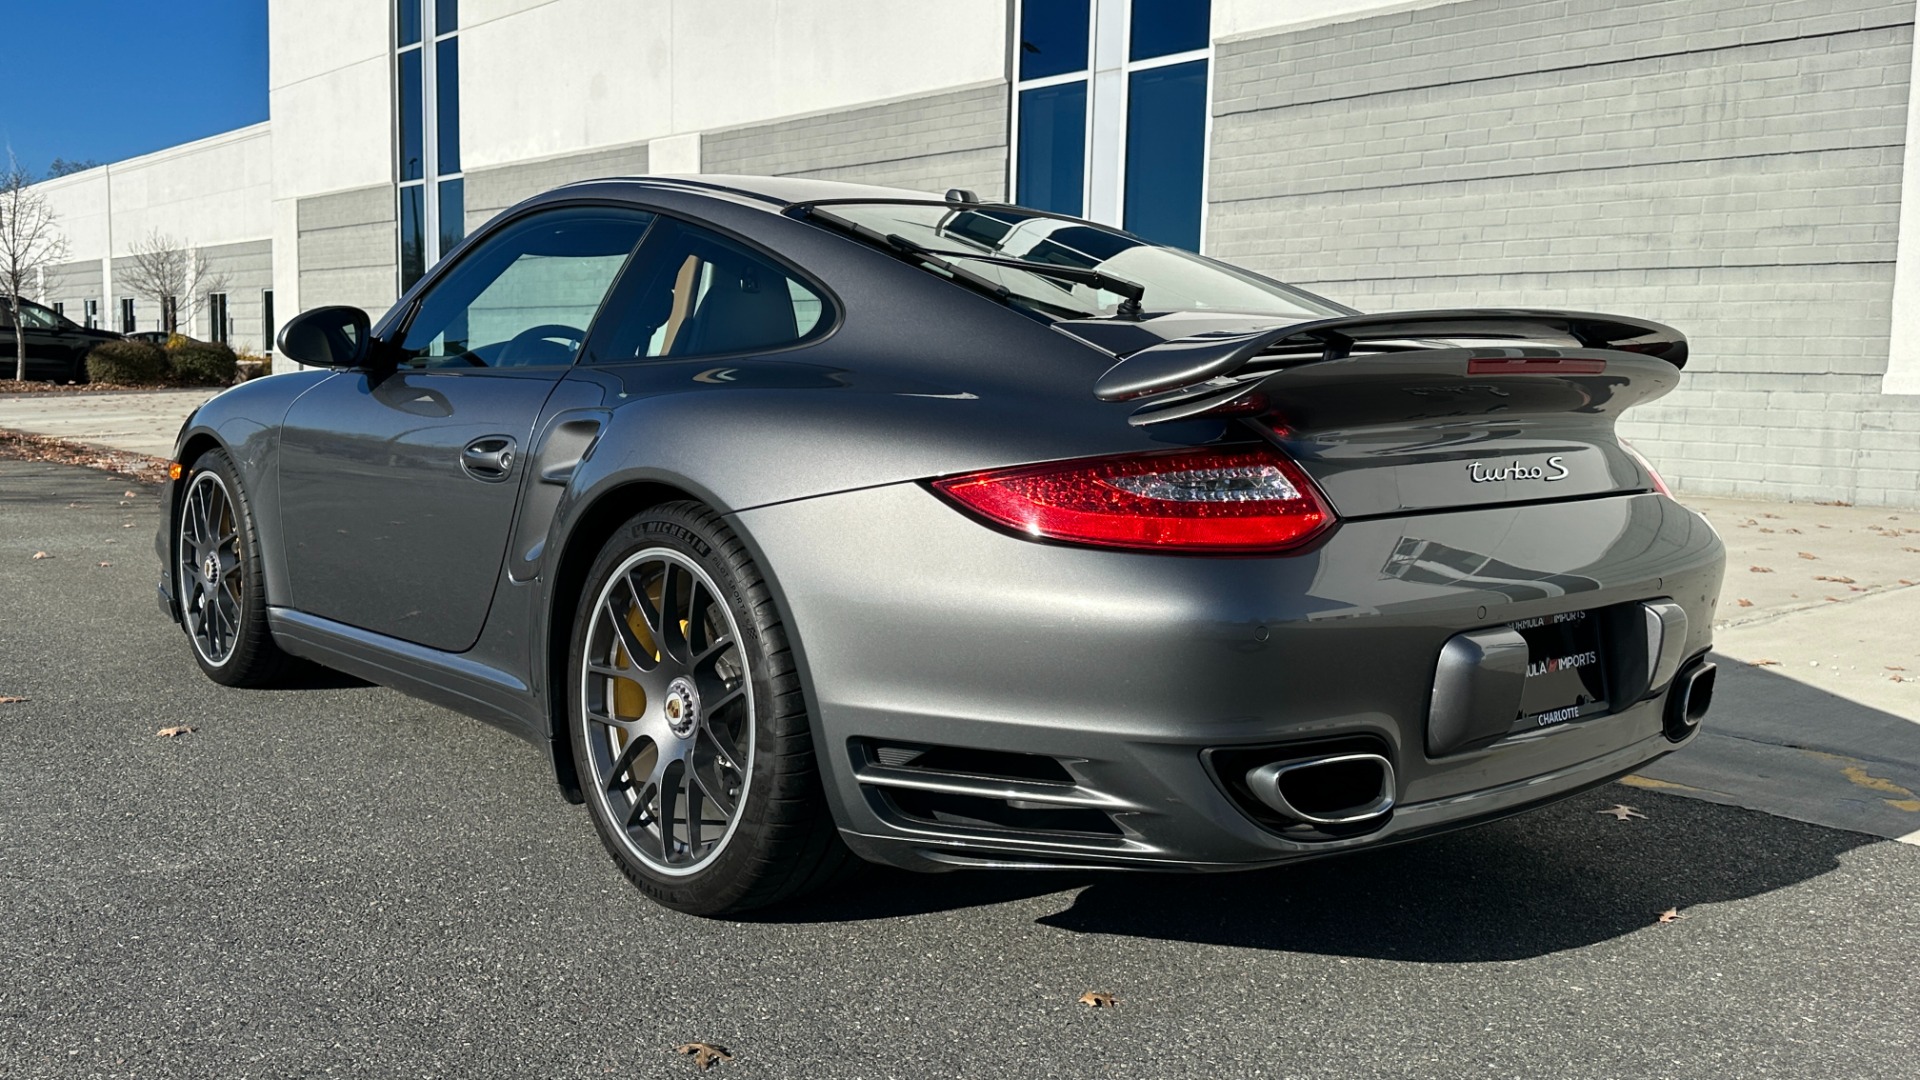 Used 2012 Porsche 911 TURBO S / CENTER LOCK WHEELS / FULL LEATHER INTERIOR / YELLOW CALIPERS / PA for sale Sold at Formula Imports in Charlotte NC 28227 4